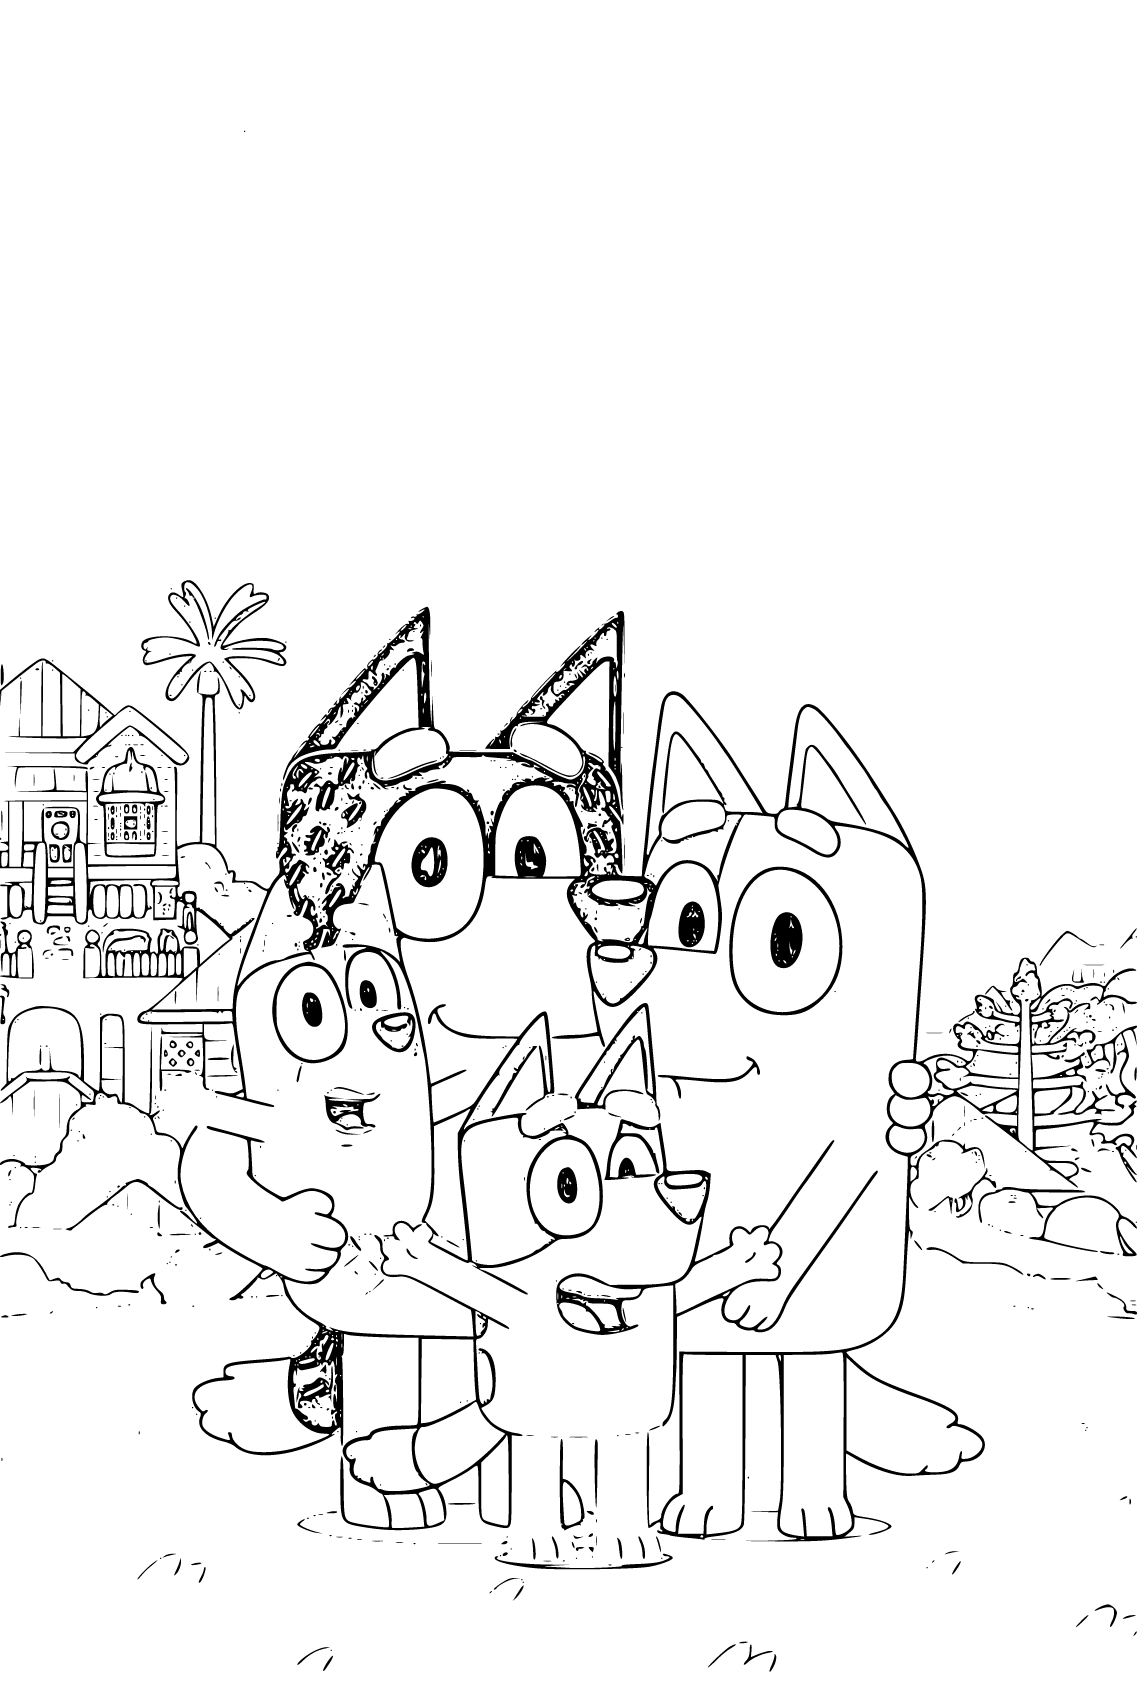 Bluey FAMILY Coloring Pages - SheetalColor.com